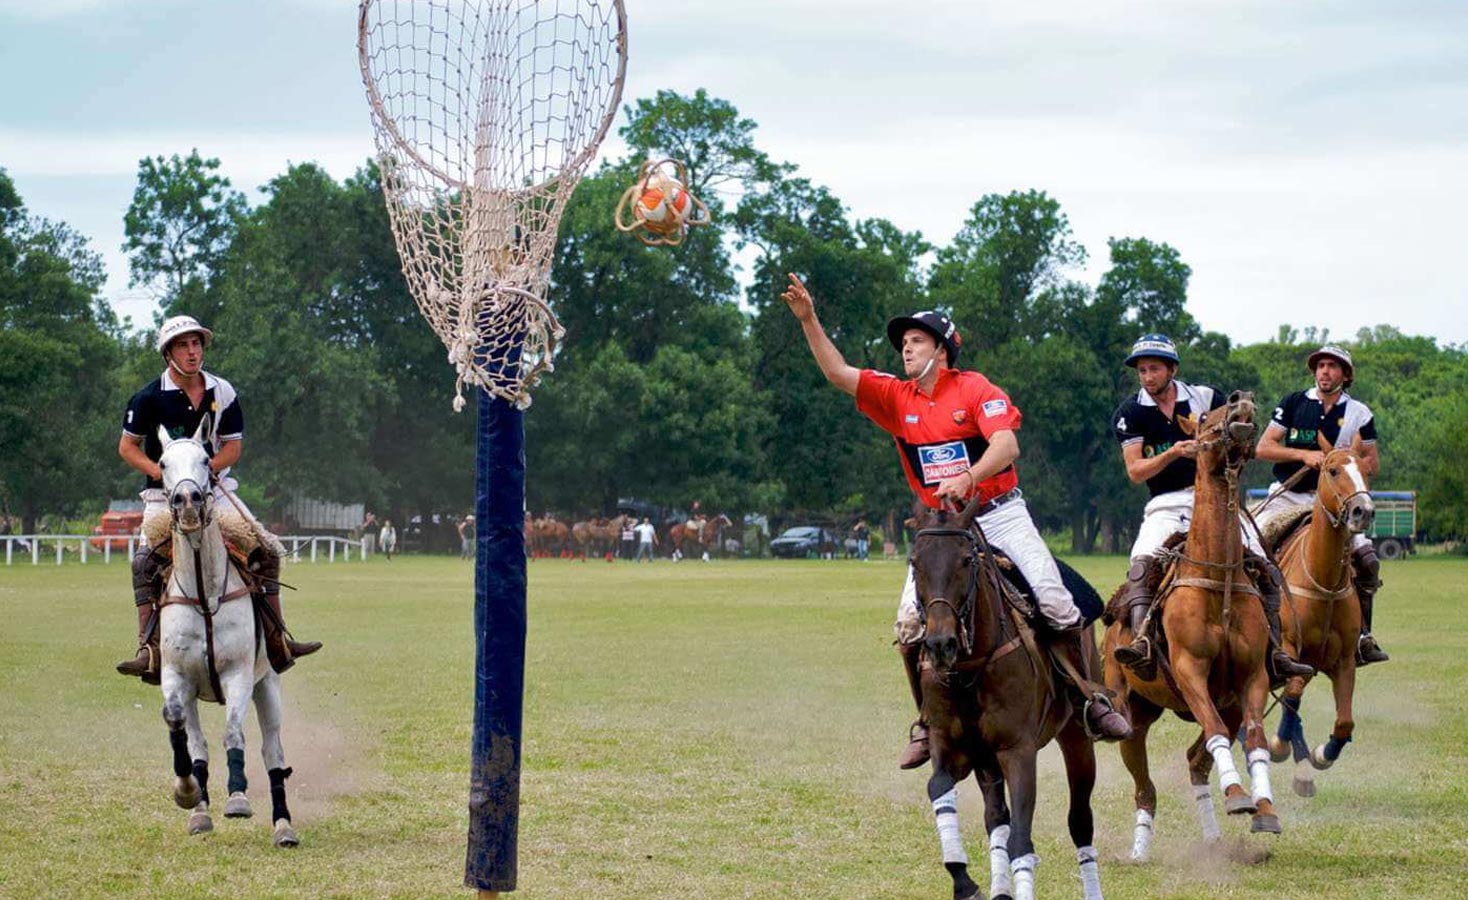 Argentina’s journey in Polo